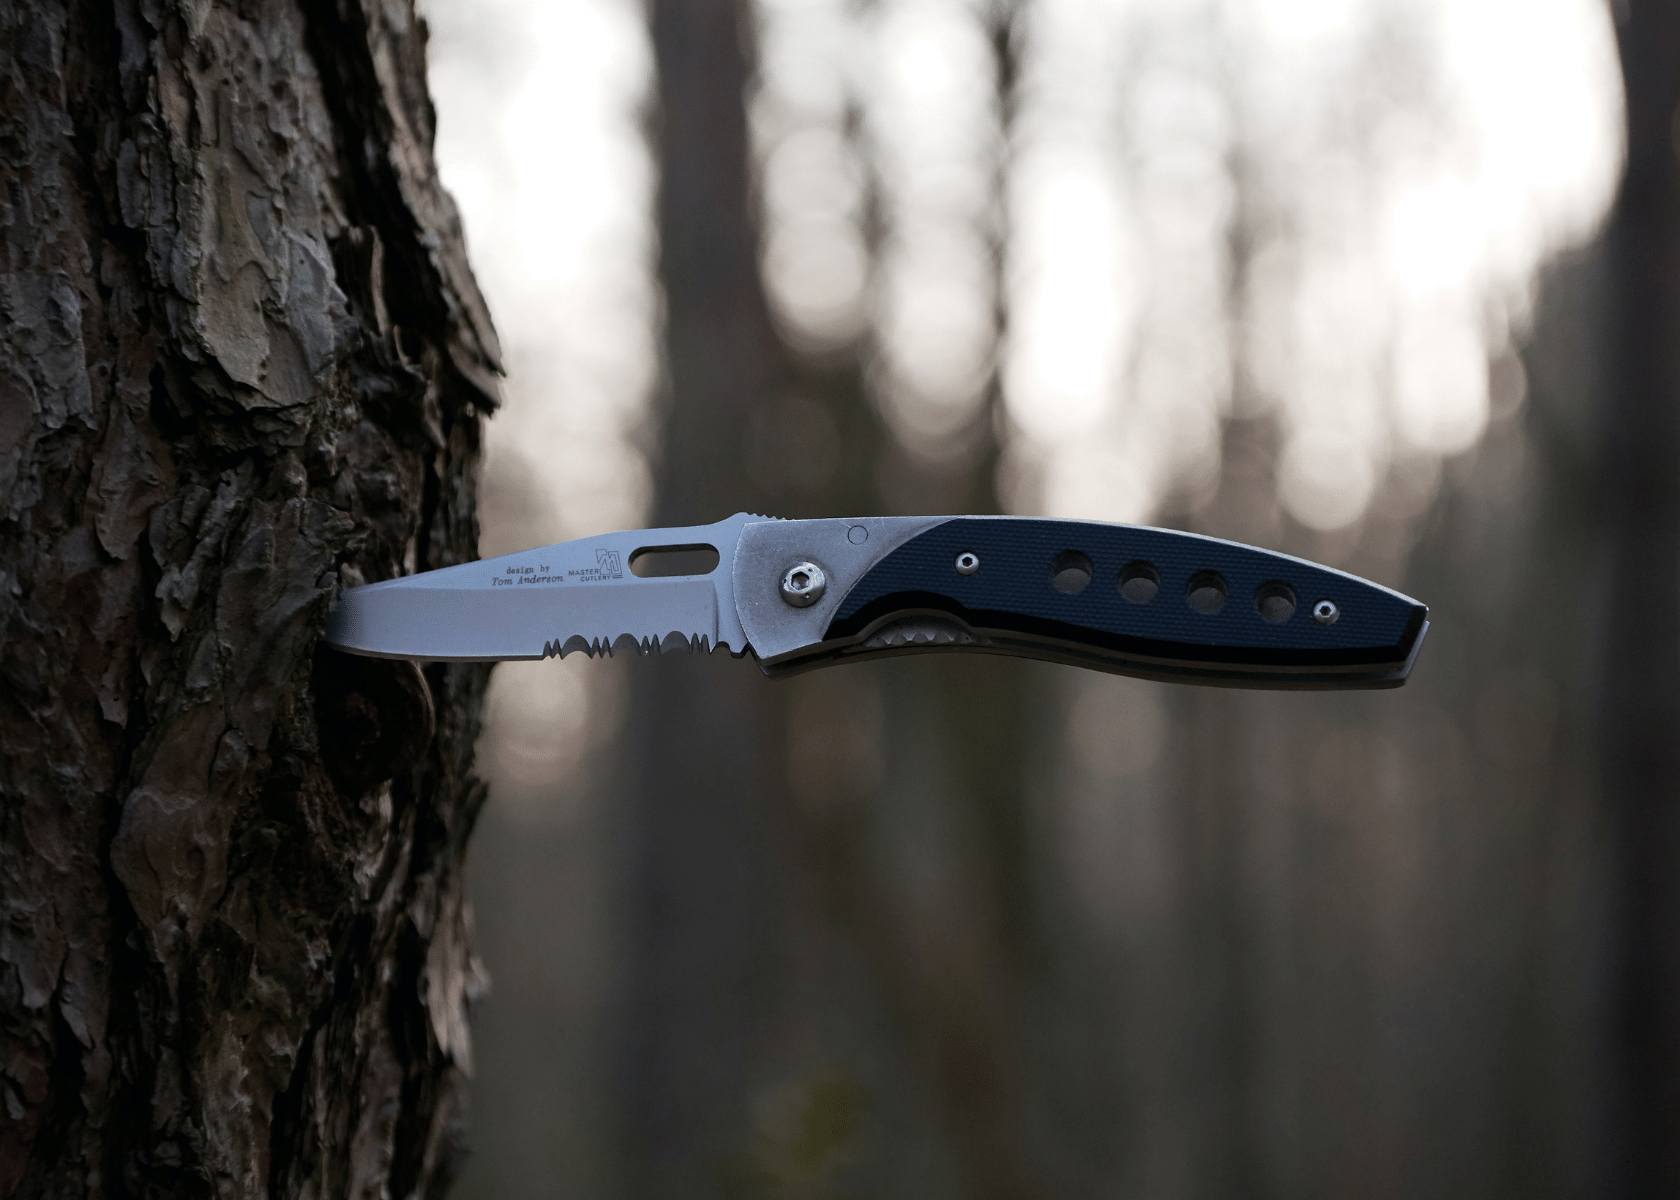 A stainless steel partially serrated knife stabbed into a tree in the woods